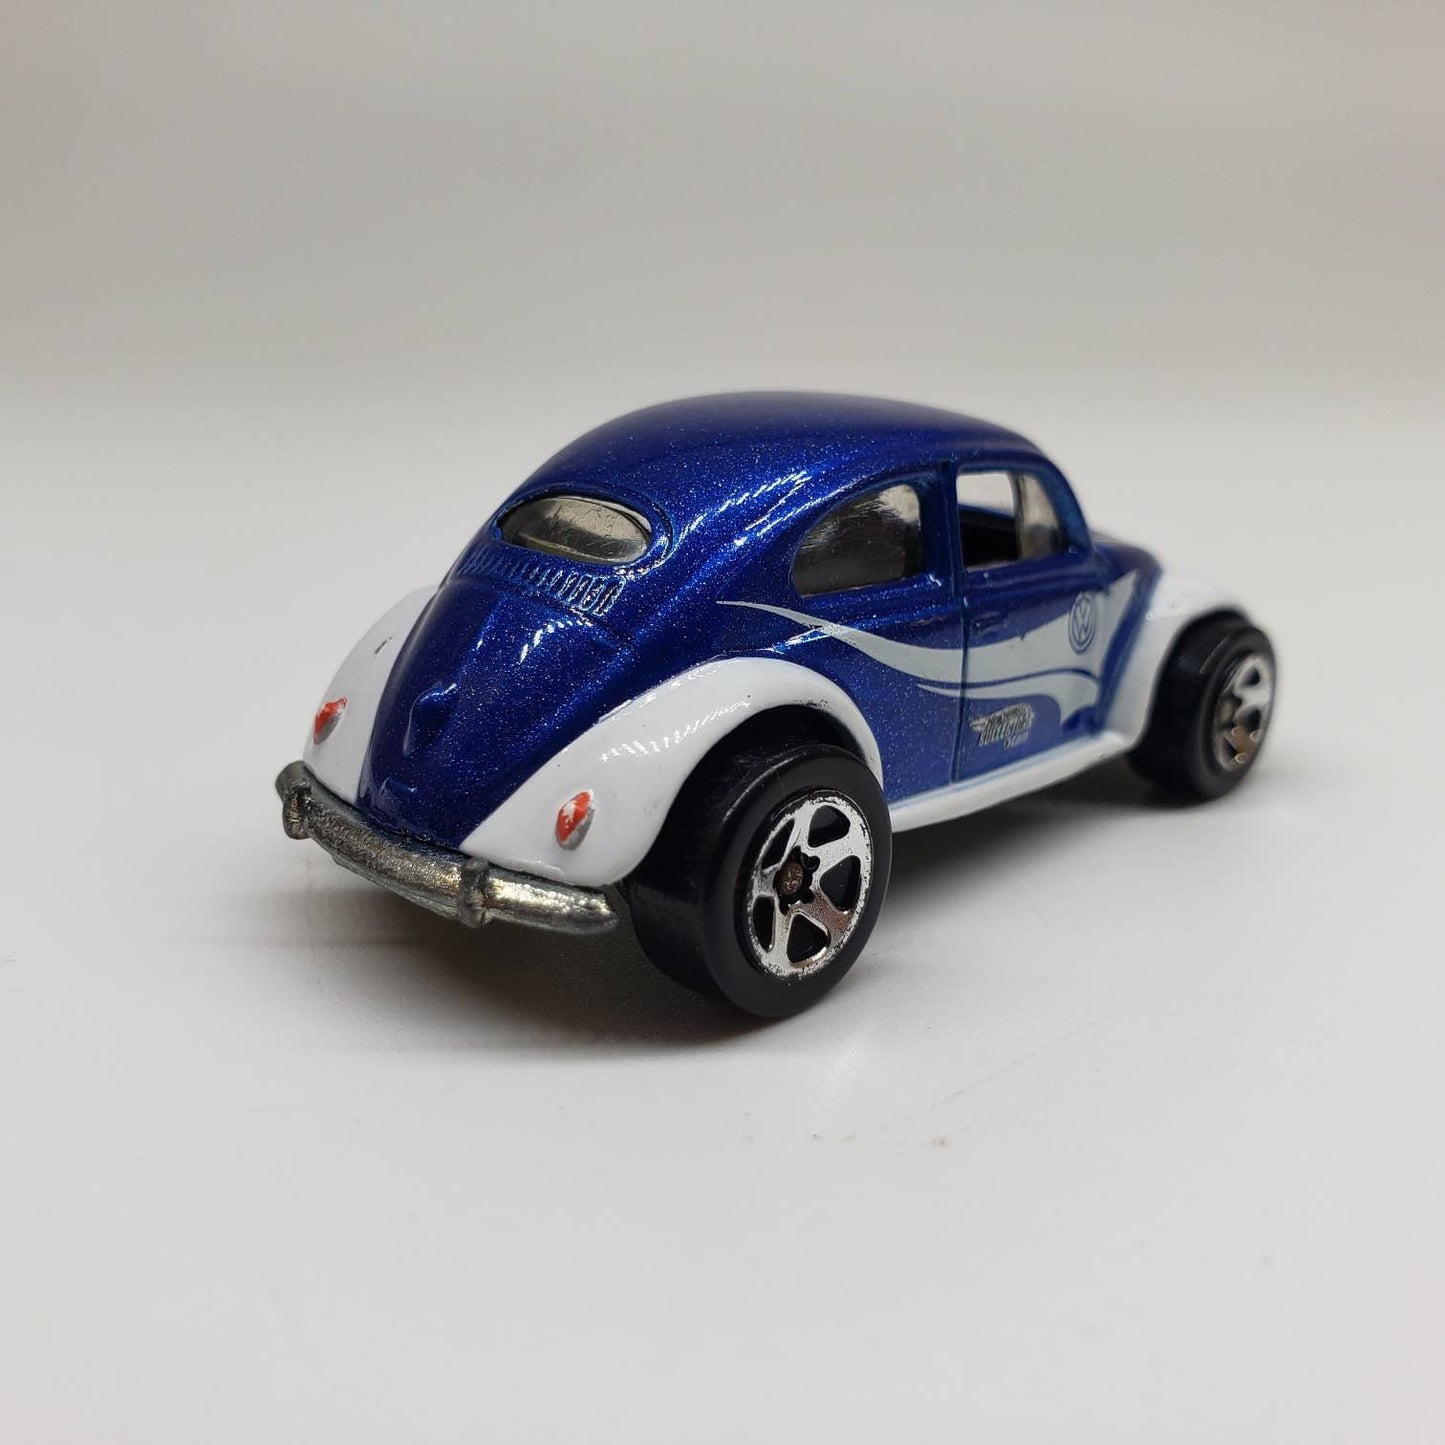 Hot Wheels VW Bug Blue Mystery Cars Volkswagen Beetle Collectible Miniature Scale Model Toy Car Perfect Birthday Gift